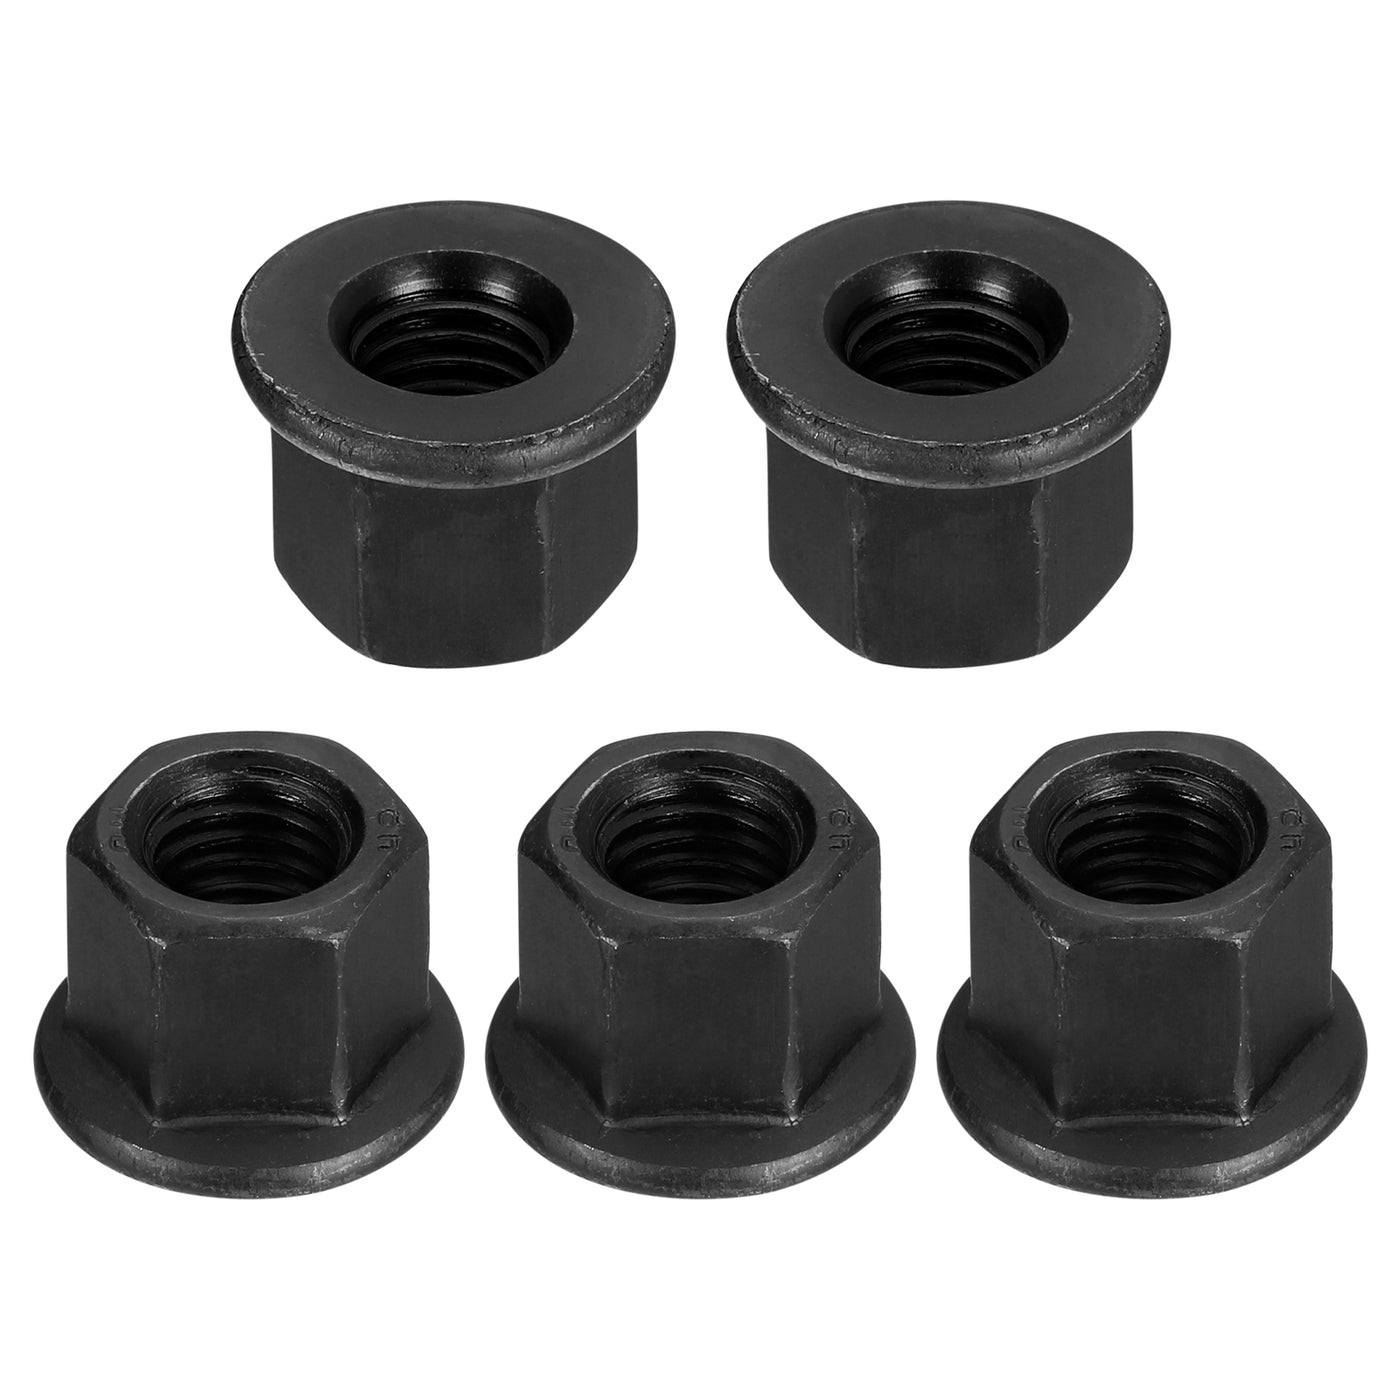 uxcell Uxcell M12 Flange Hex Lock Nuts, 5pcs Grade 12.9 Carbon Steel Hex Flange Nuts